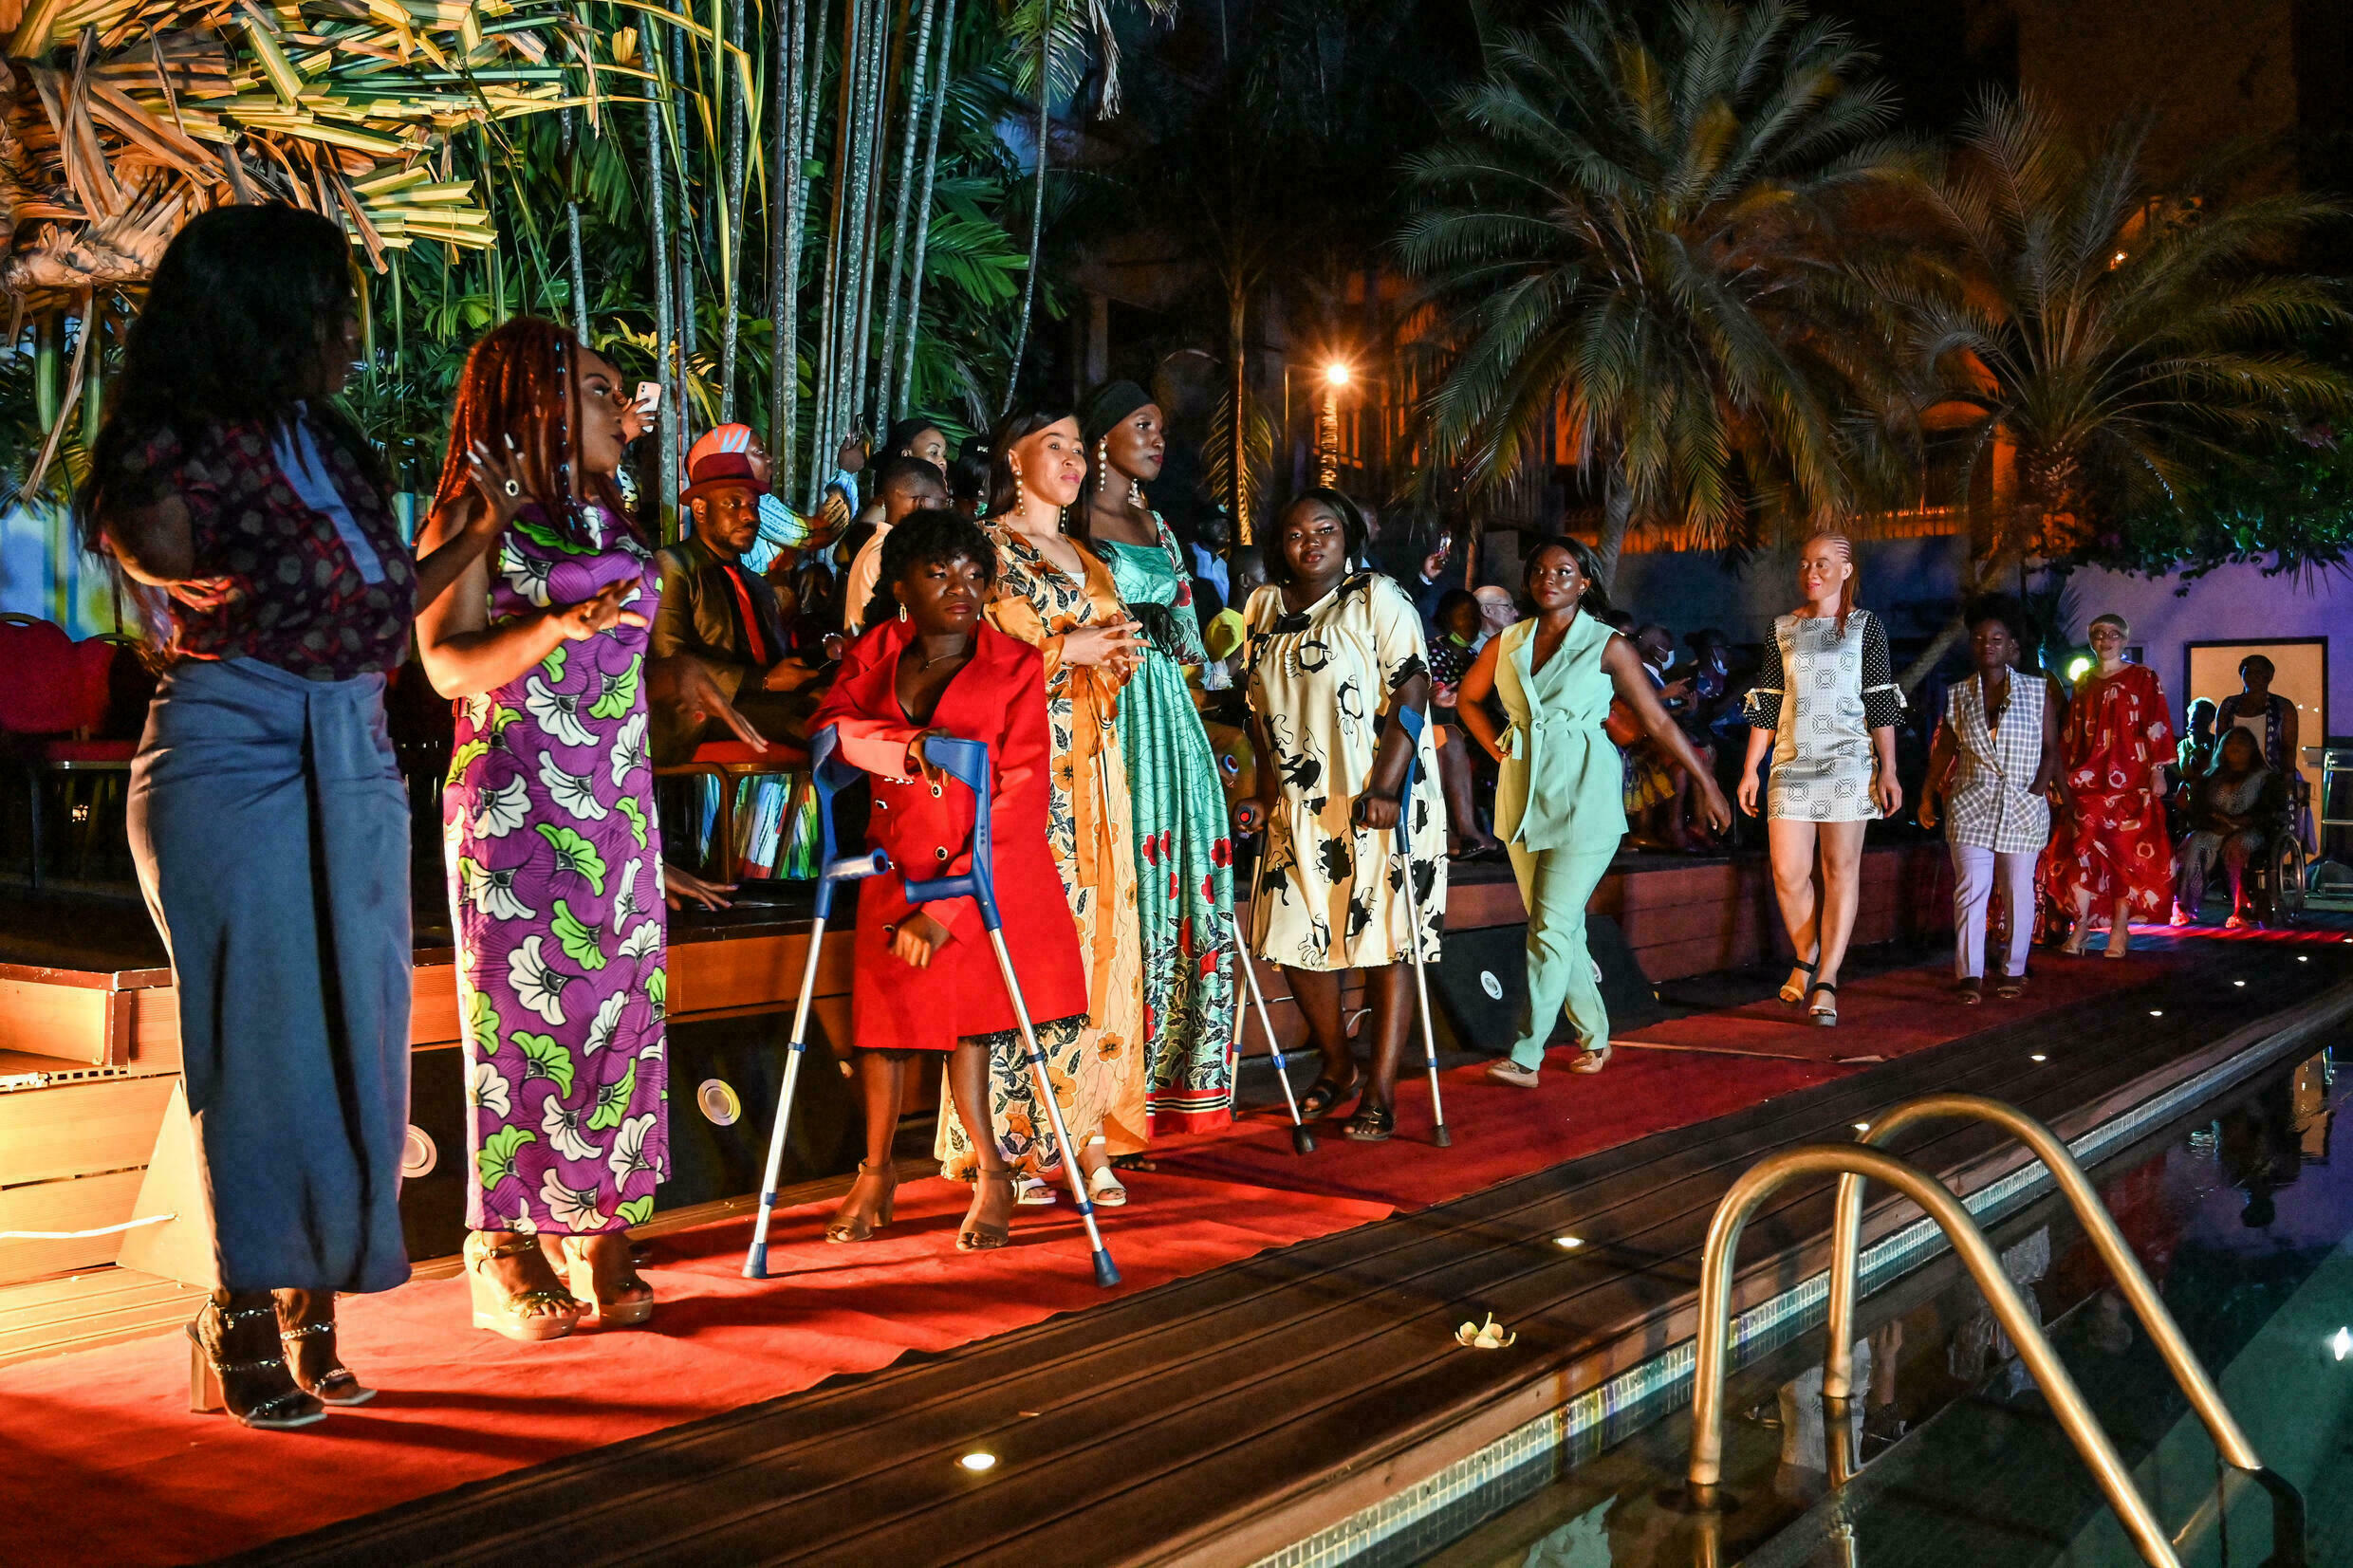 Empowering disabled women at the Mougnan Foundation show. Photo: AFP